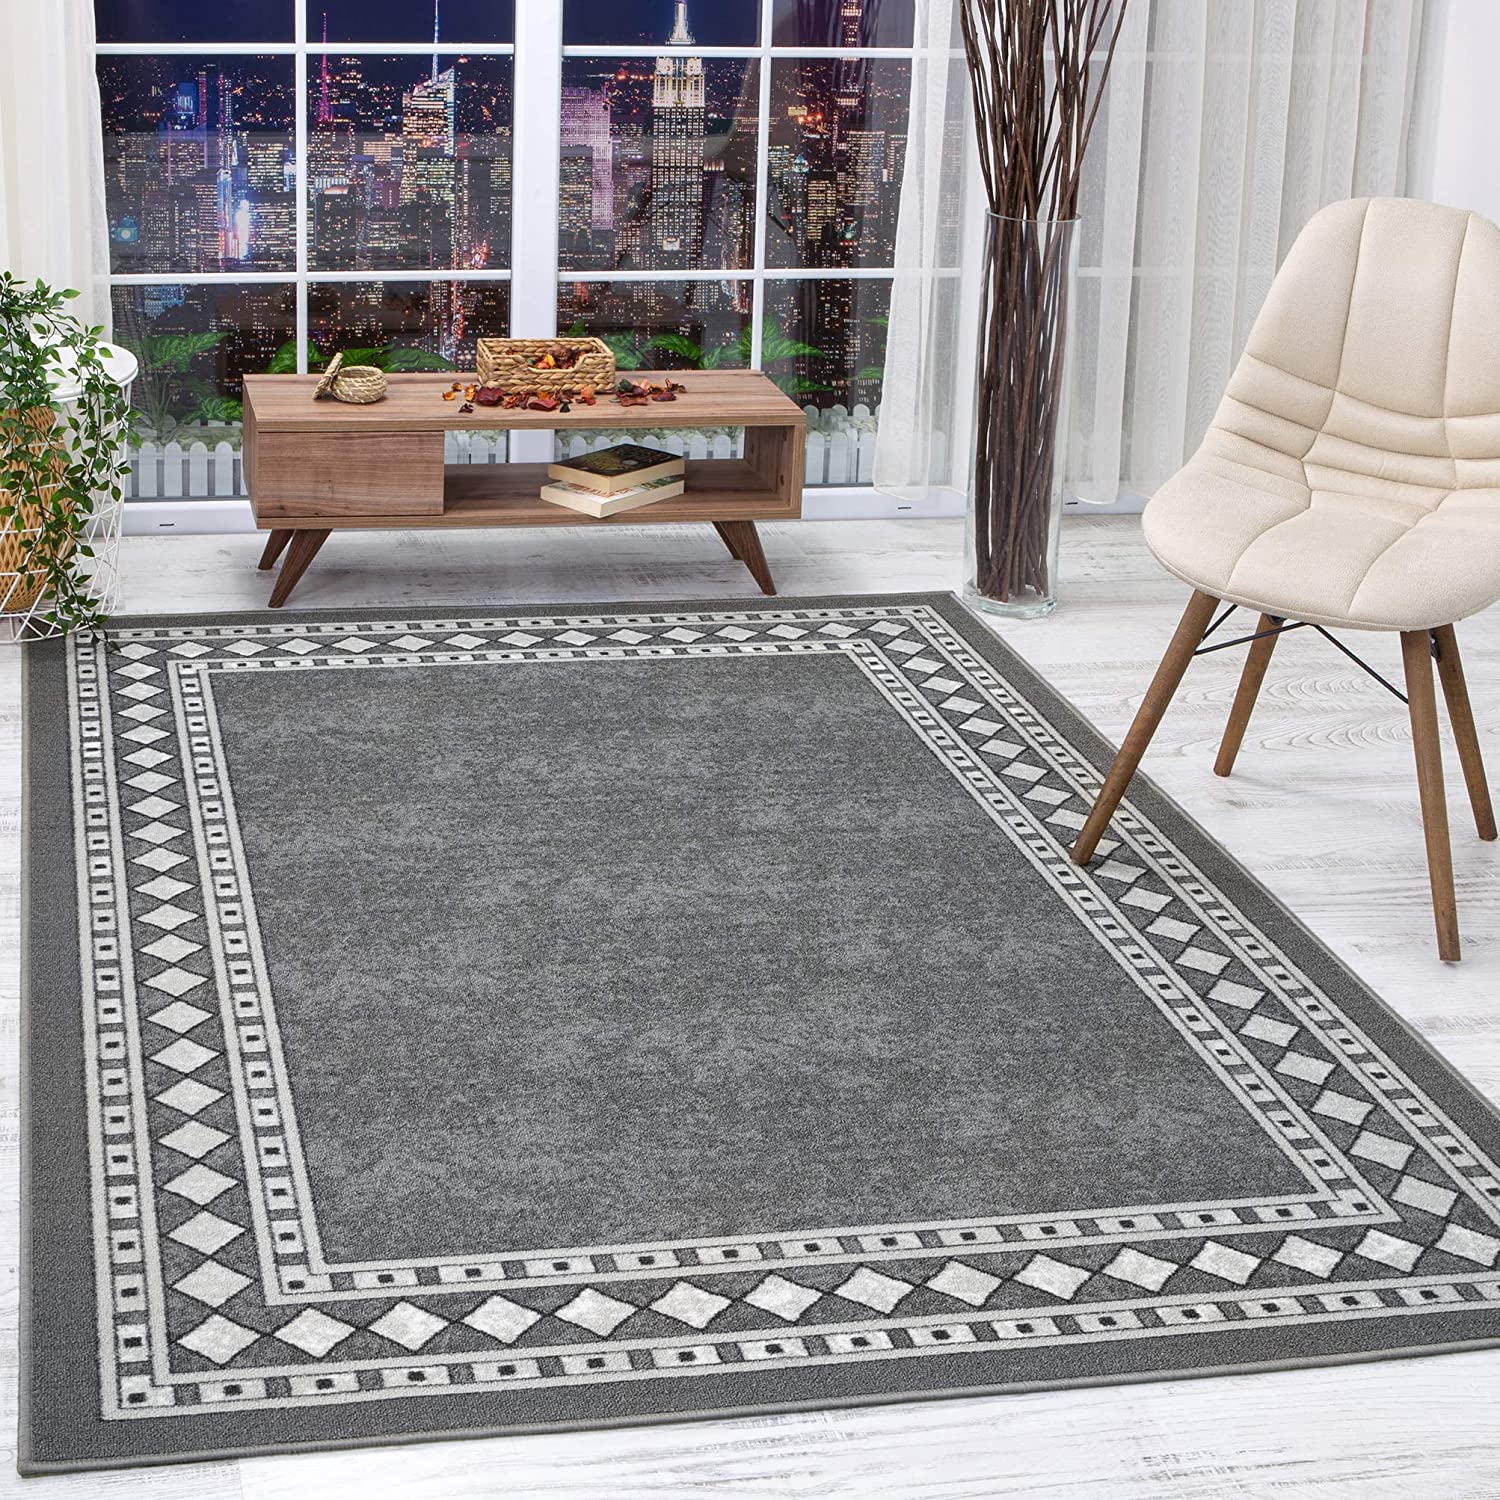 Antep Low Profile Pile Rubber Backing Indoor Area Rugs Alfombras Modern Bordered